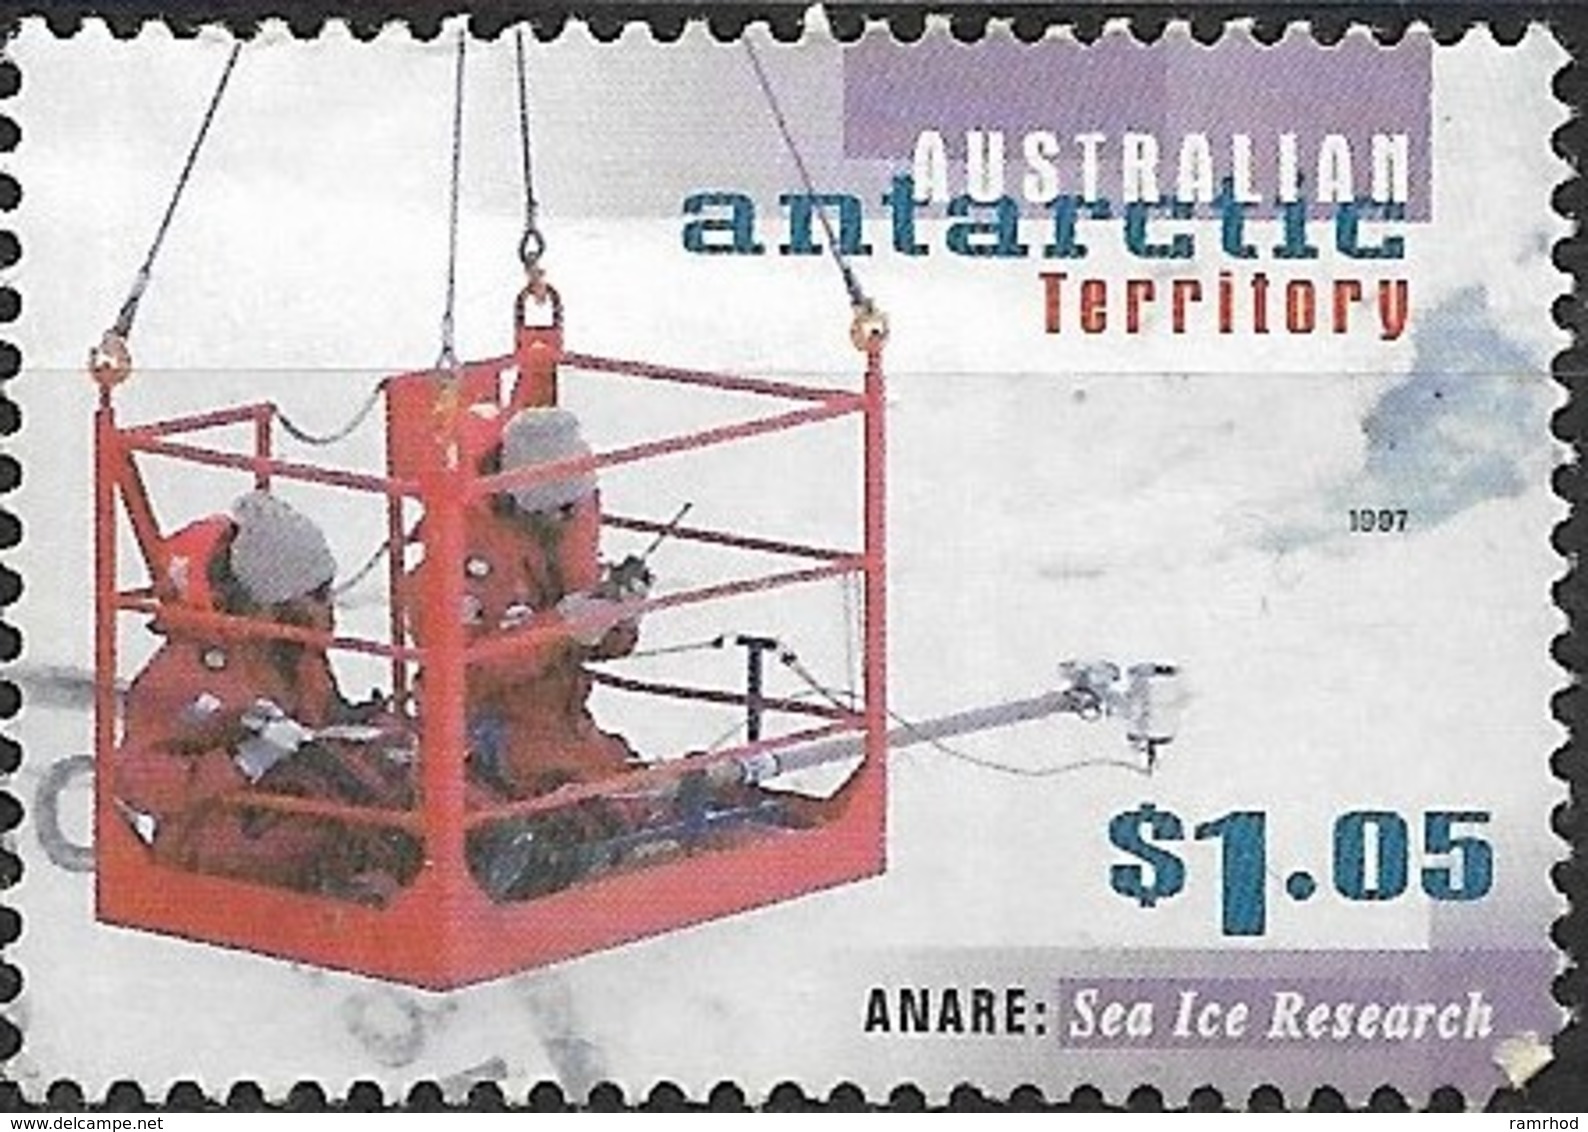 AUSTRALIAN ANTARCTIC TERRITORY 1997 50th Anniv National Antarctic Research Expeditions - $1.05 - Scientists In Cage FU - Usados